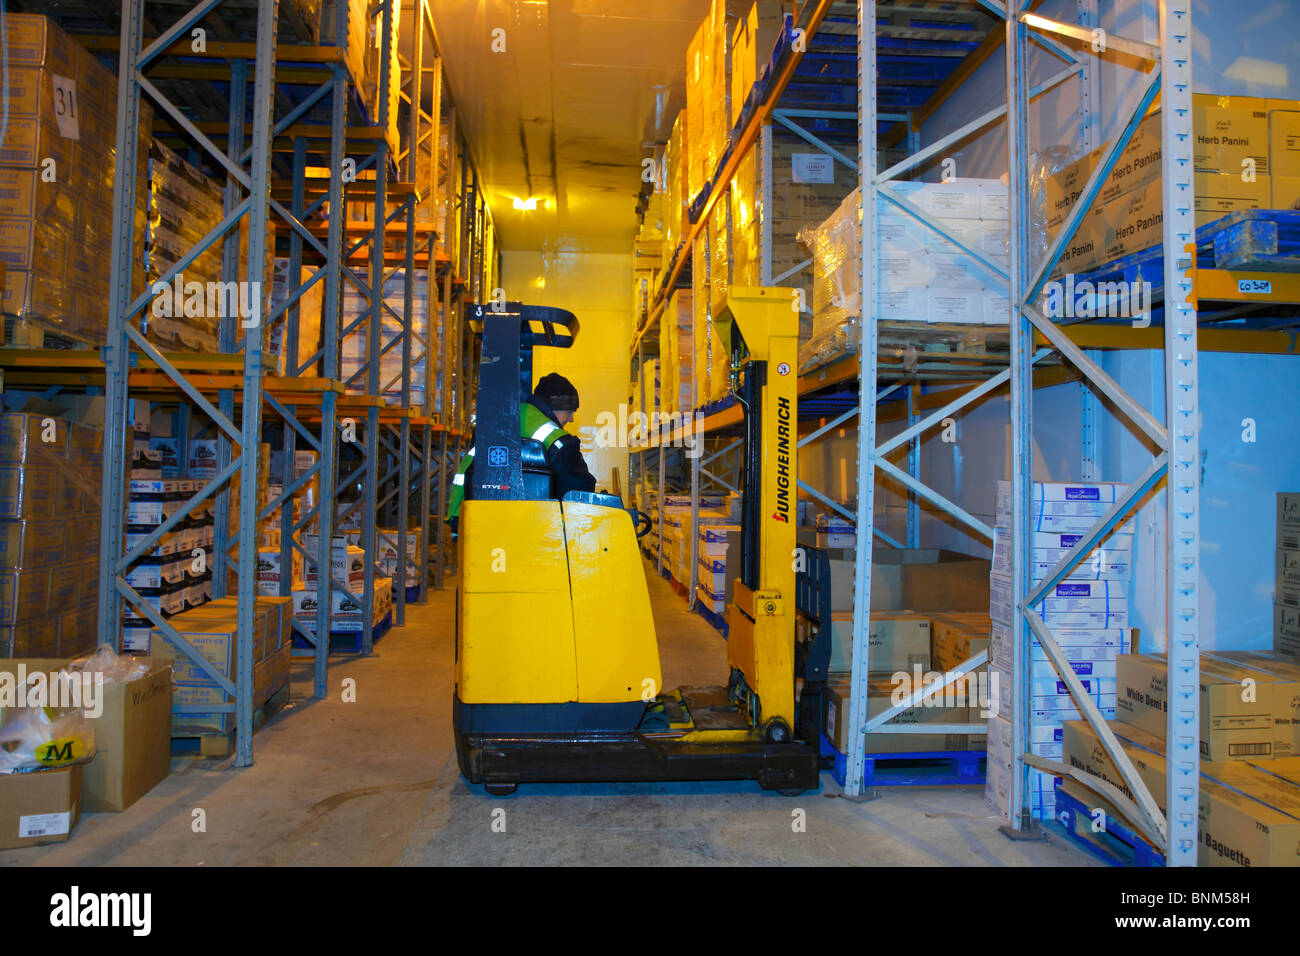 Fork Lift Truck operating in a frozen goods warehouse. Stock Photo